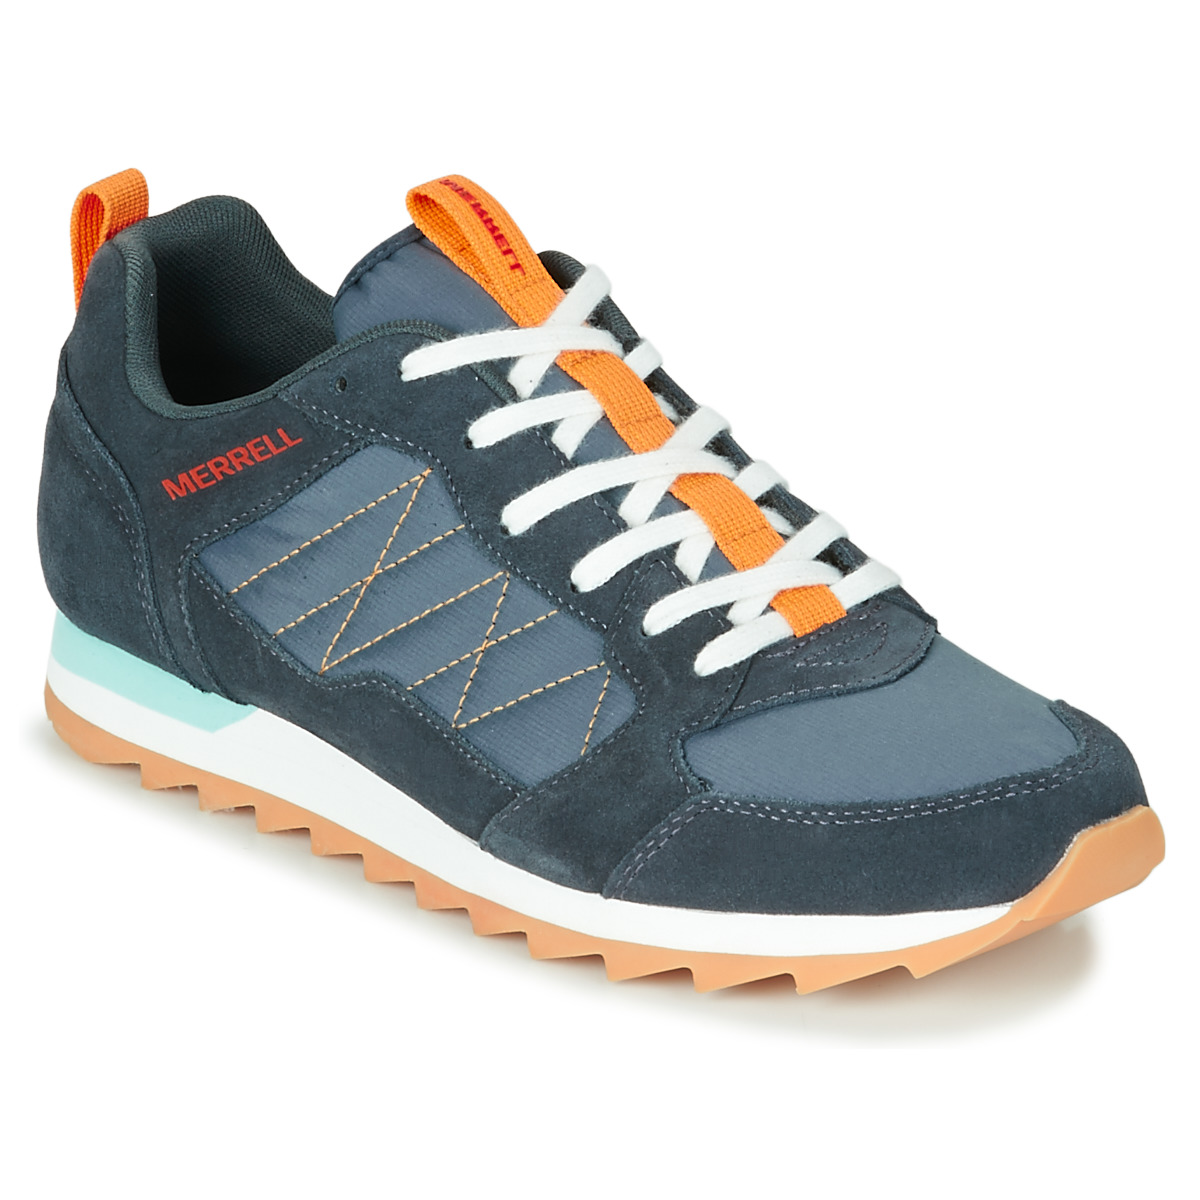 Merrell ALPINE Blue / Orange - Fast delivery | Spartoo Europe ! - Shoes Low top trainers Men 95,00 €